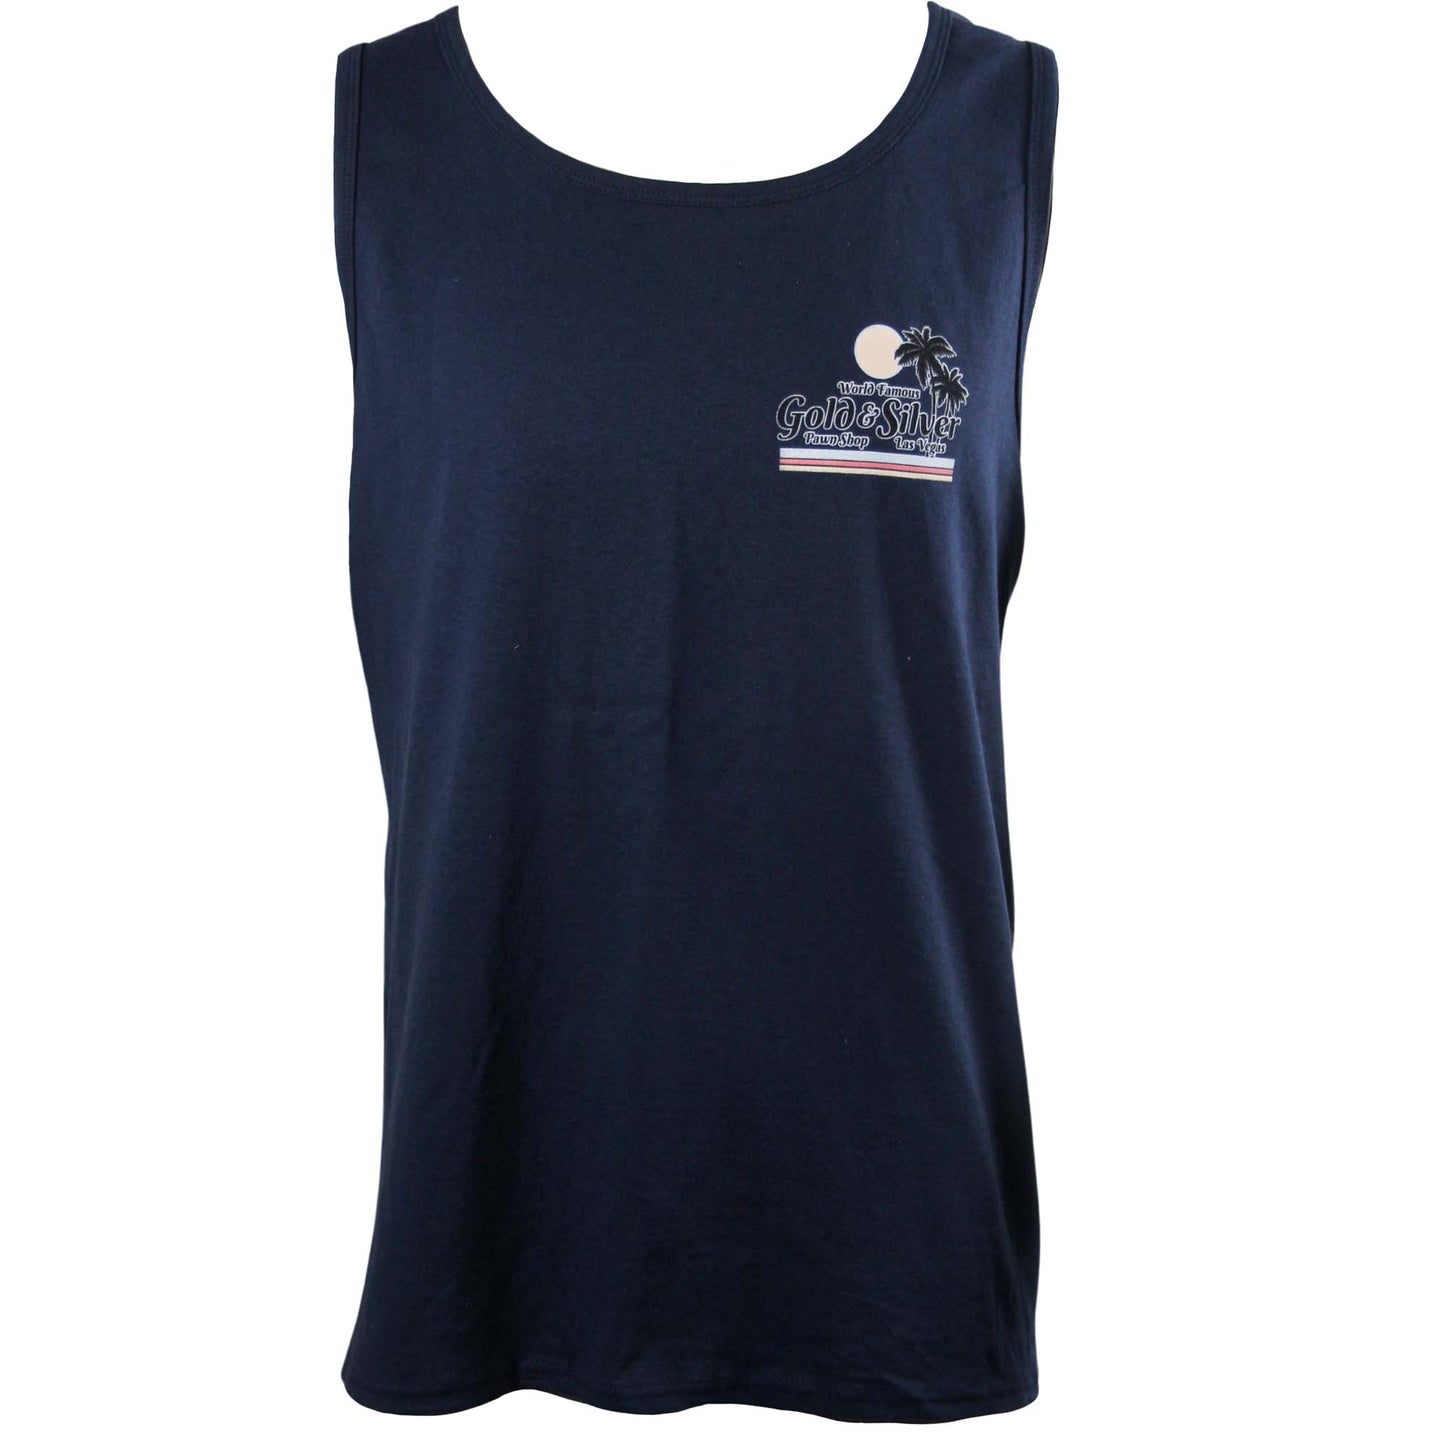 Gold & Silver Pawn Shop Navy Blue Palm Tree Tank Top ZOOM